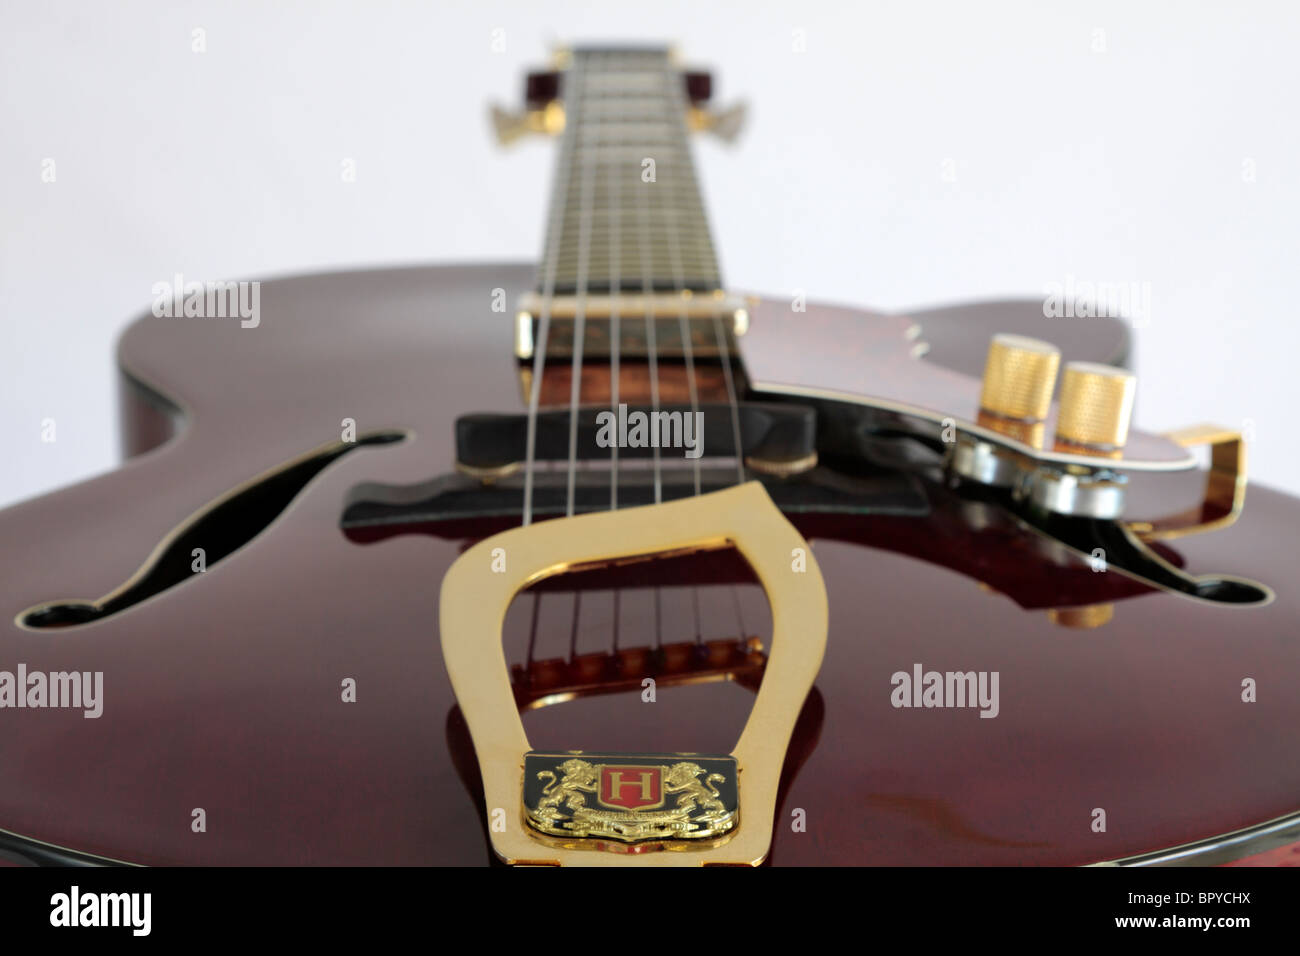 A Hagstrom Jazz HL550 electric guitar Serial M06061694 made in Sweden Stock  Photo - Alamy